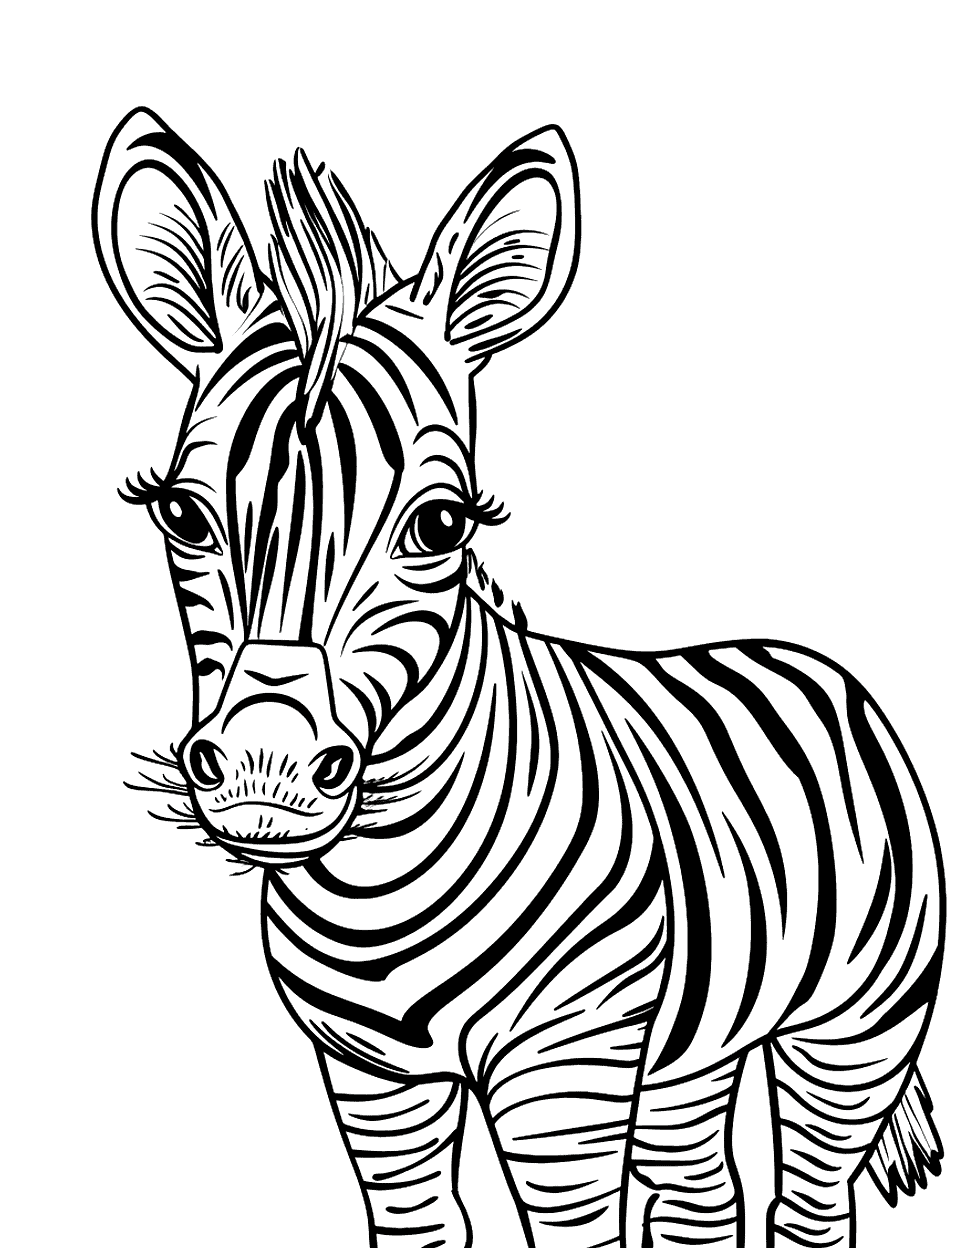 Curious Baby Zebra Coloring Page - A baby zebra looking directly at the viewer with a curious expression.